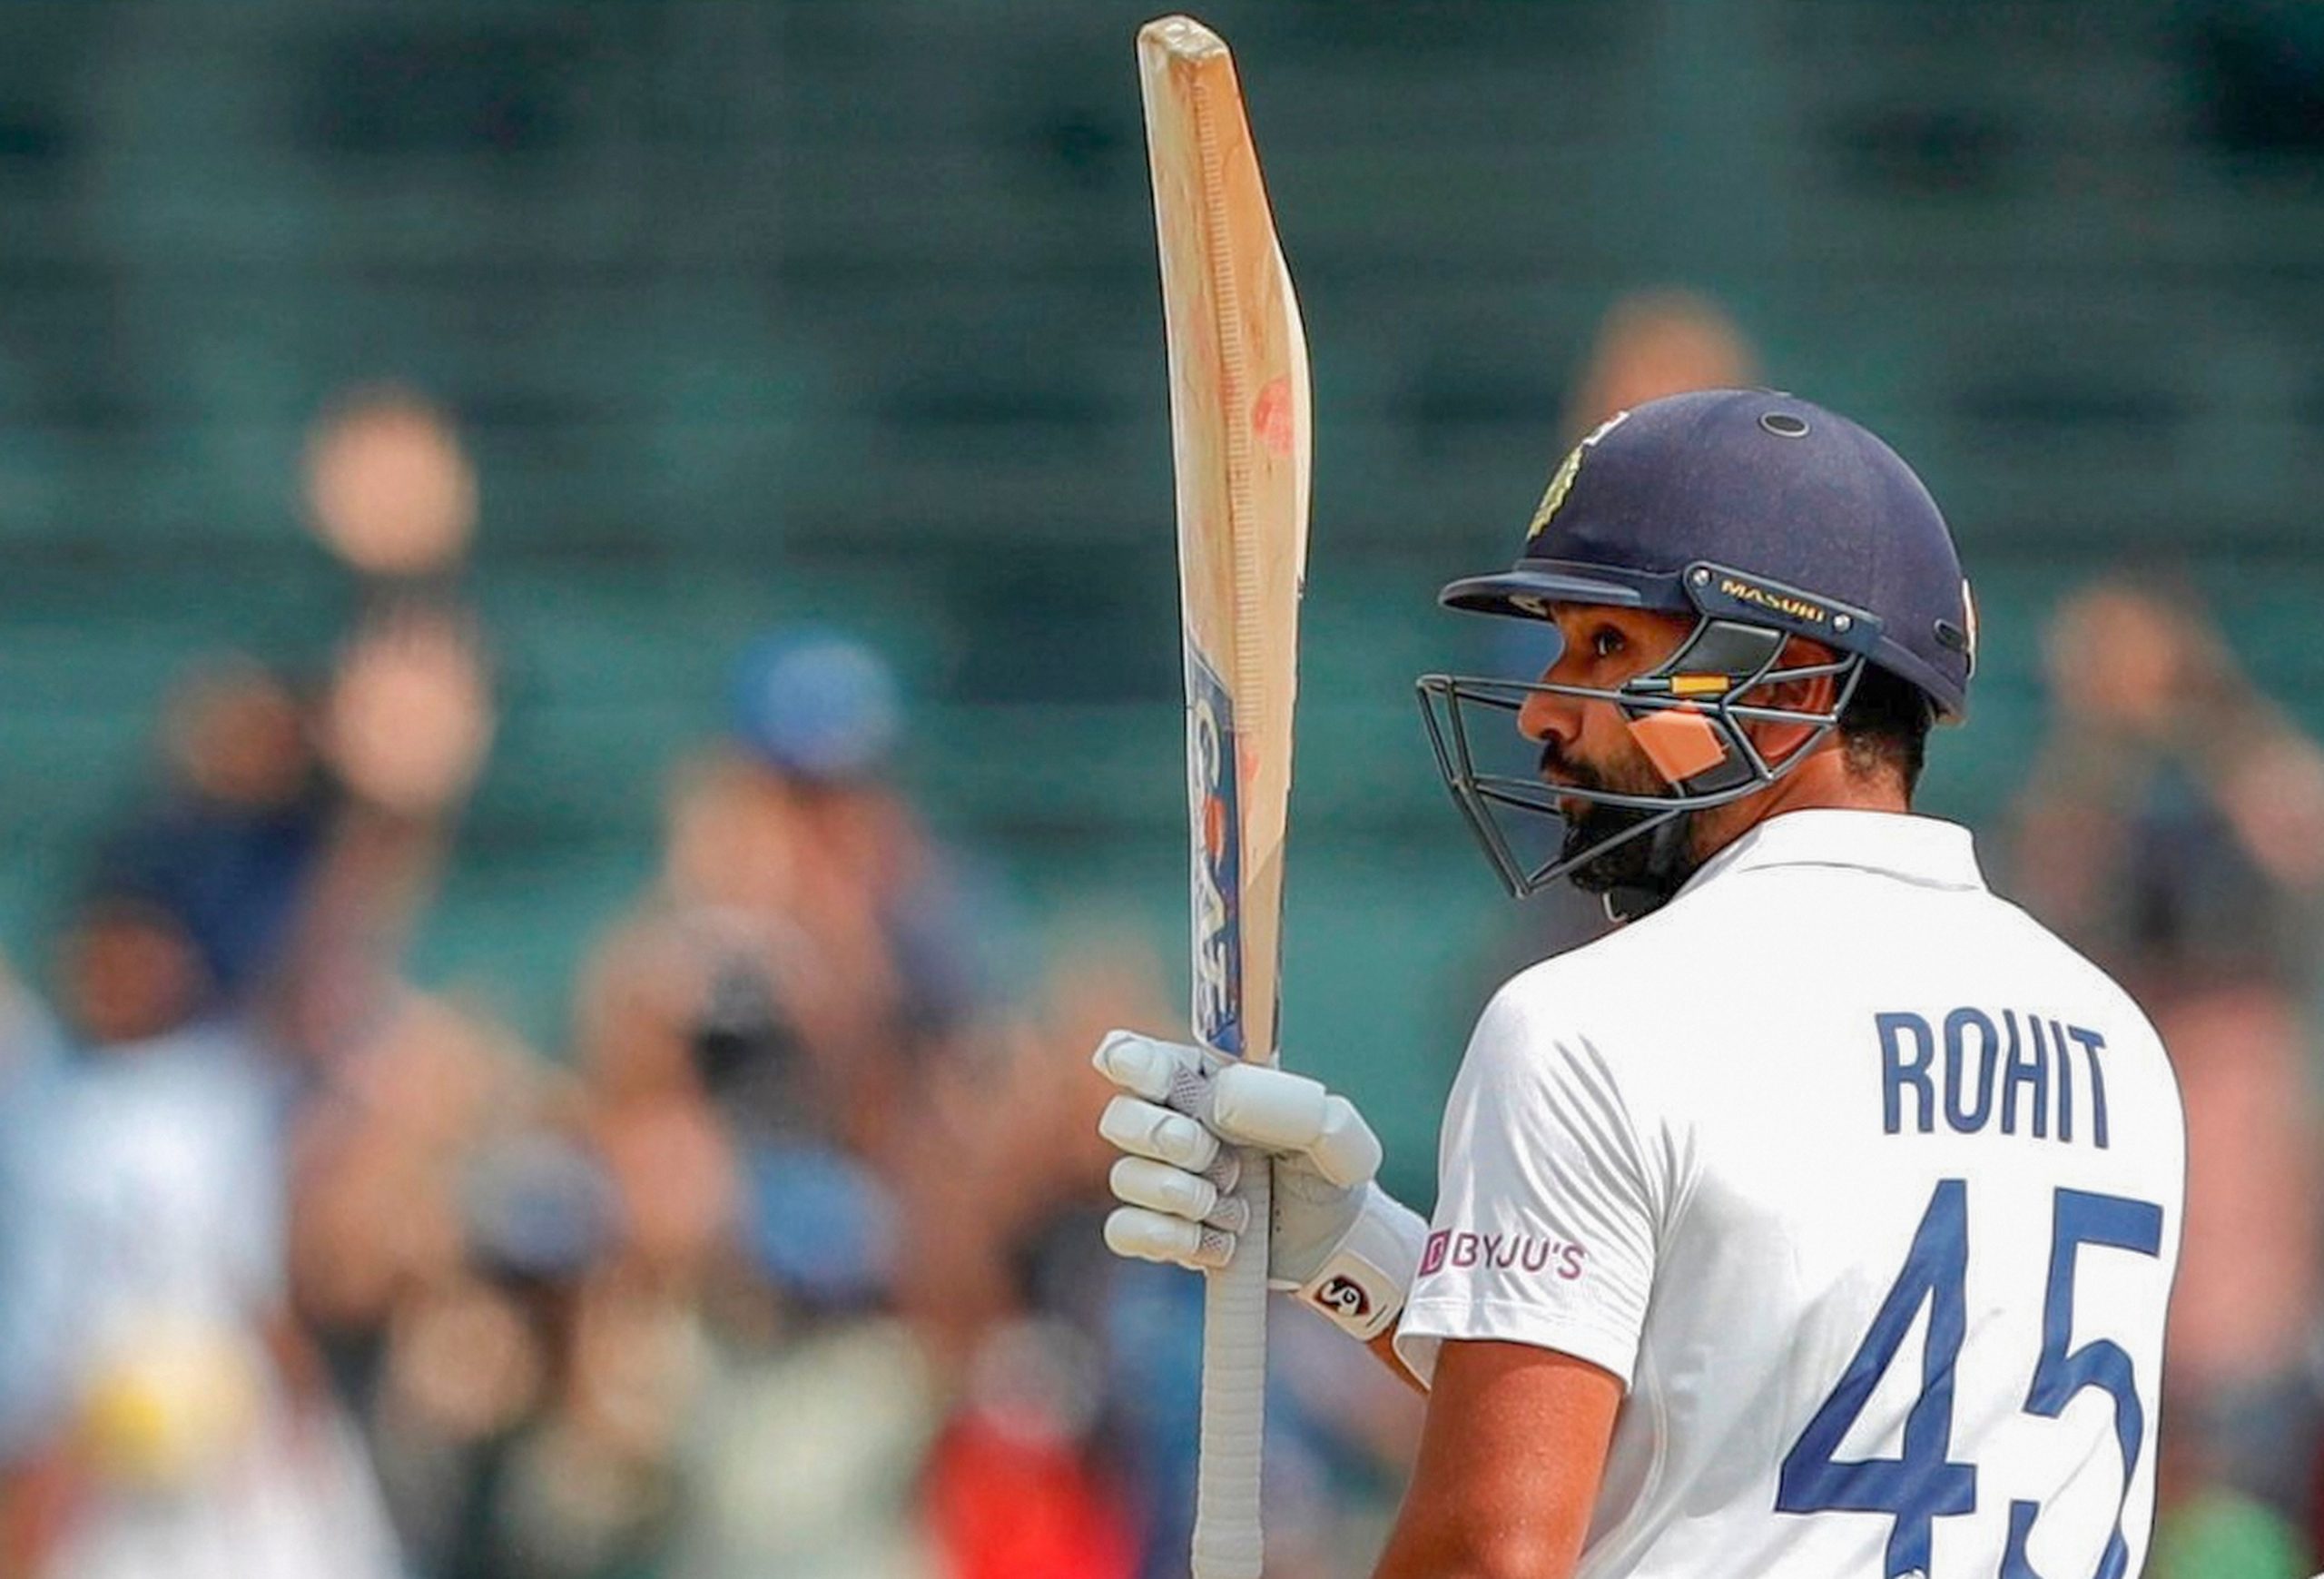 India vs England 2nd Test: Rohit Sharma’s ton boosts India to 300/6 on Day 1